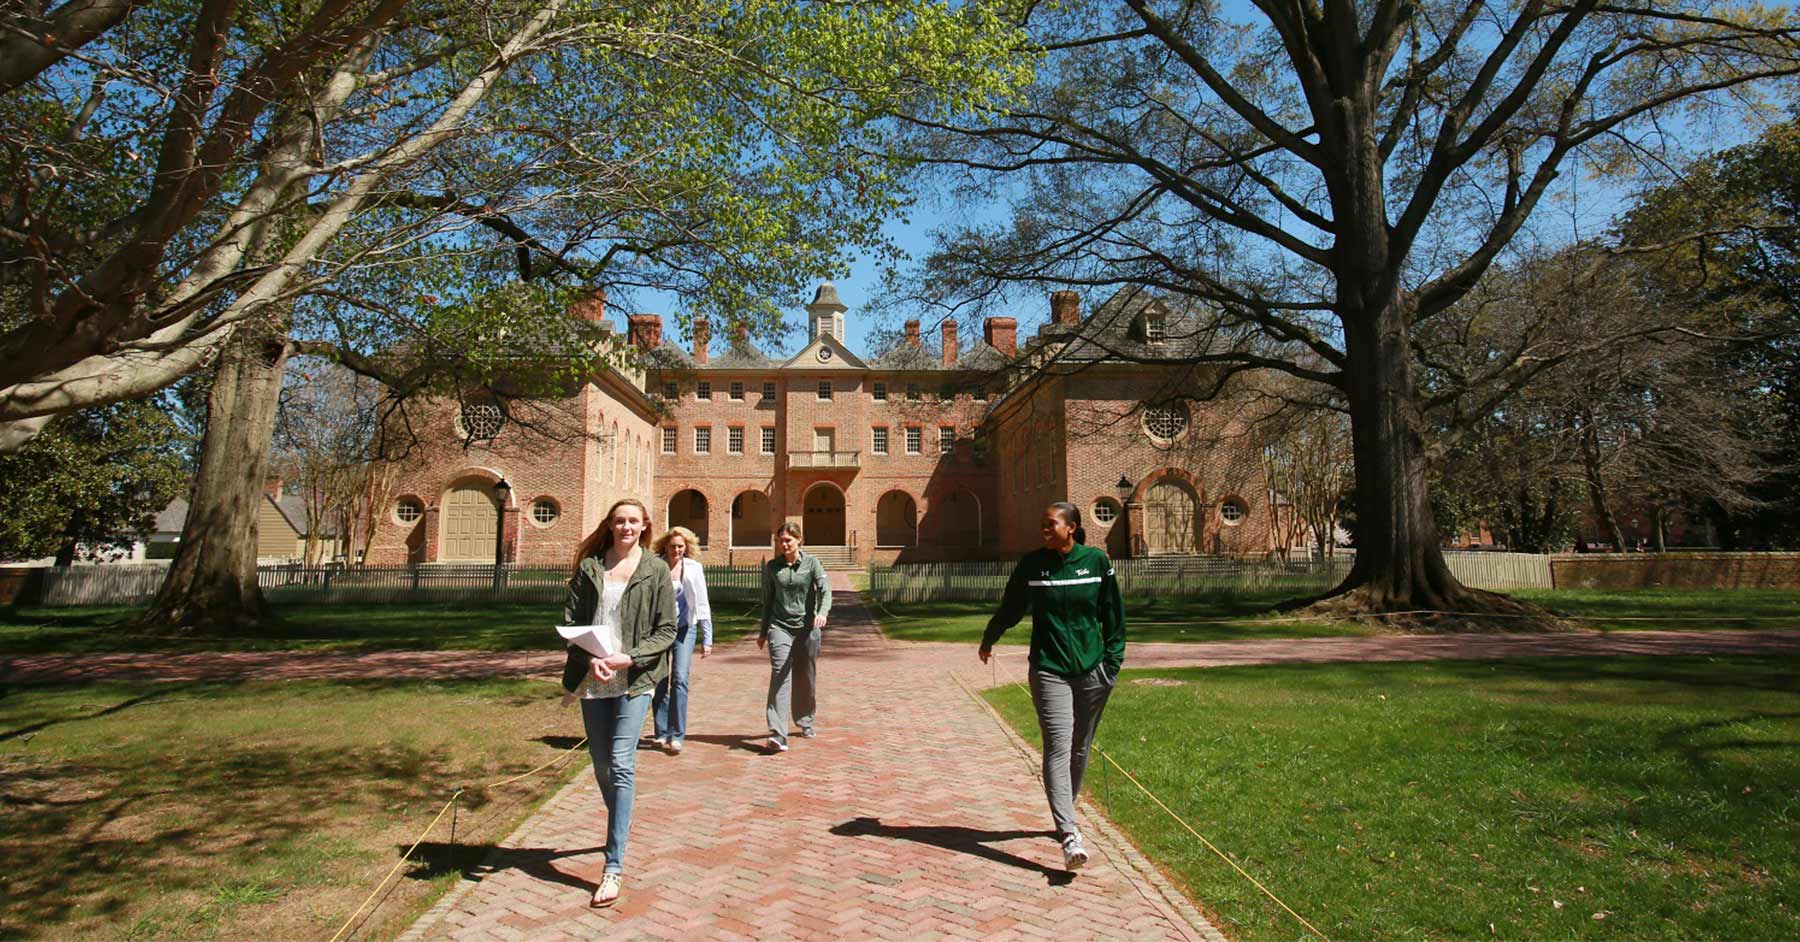 Grant Champ Is William & Mary’s New Provost